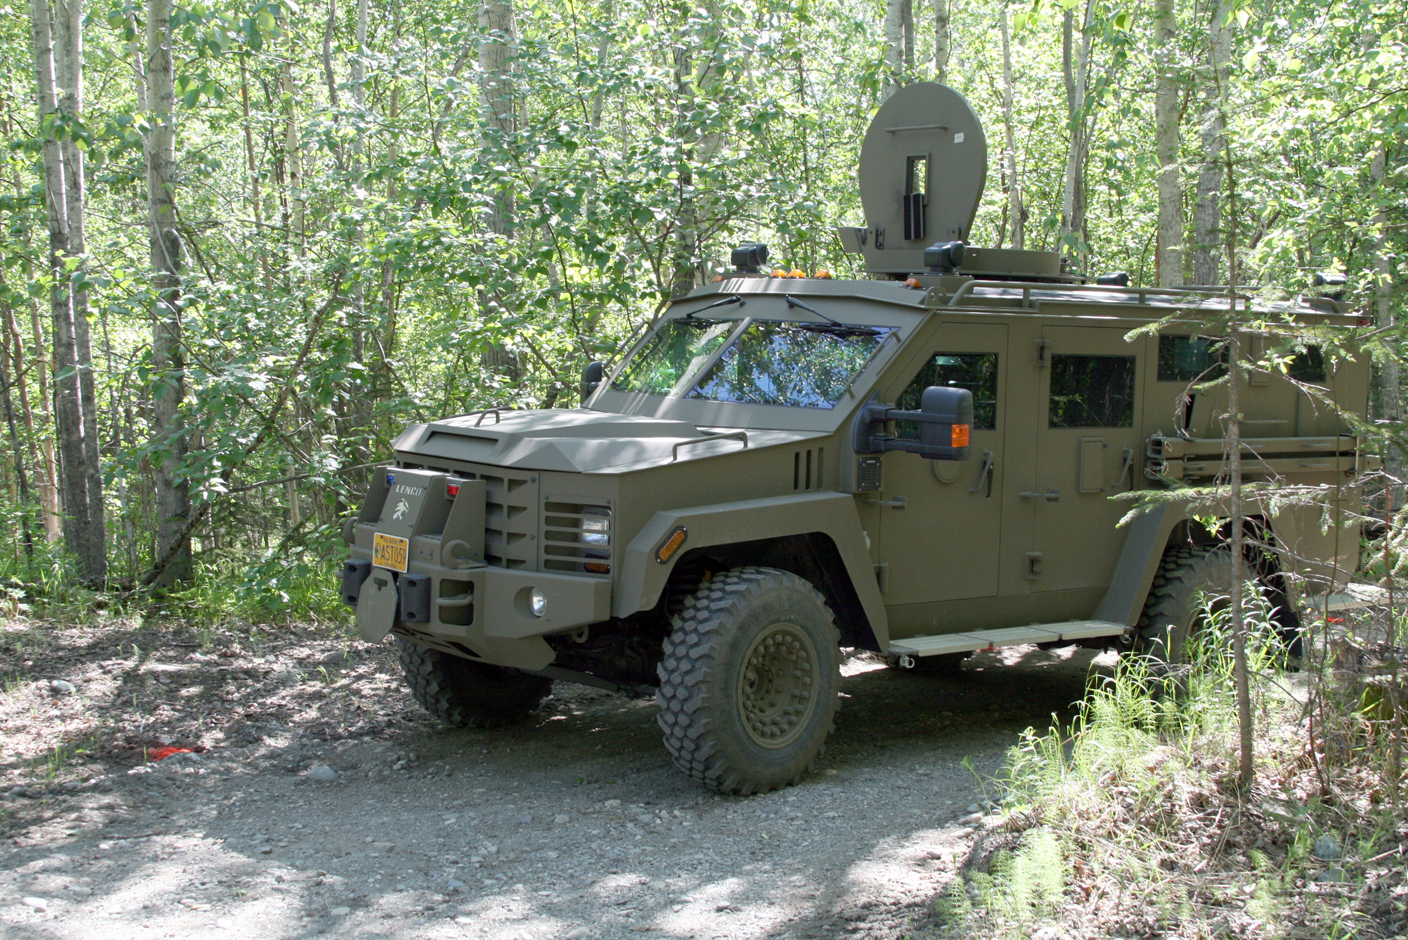 One of the Alaska State Troopers 20,000-pound BearCat armored tactical response vehicles, shown here at a recent Special Emergency Reaction Team training session in the Matanuska-Susitna river valley area.-Photo by Megan Peters, Alaska State Troopers